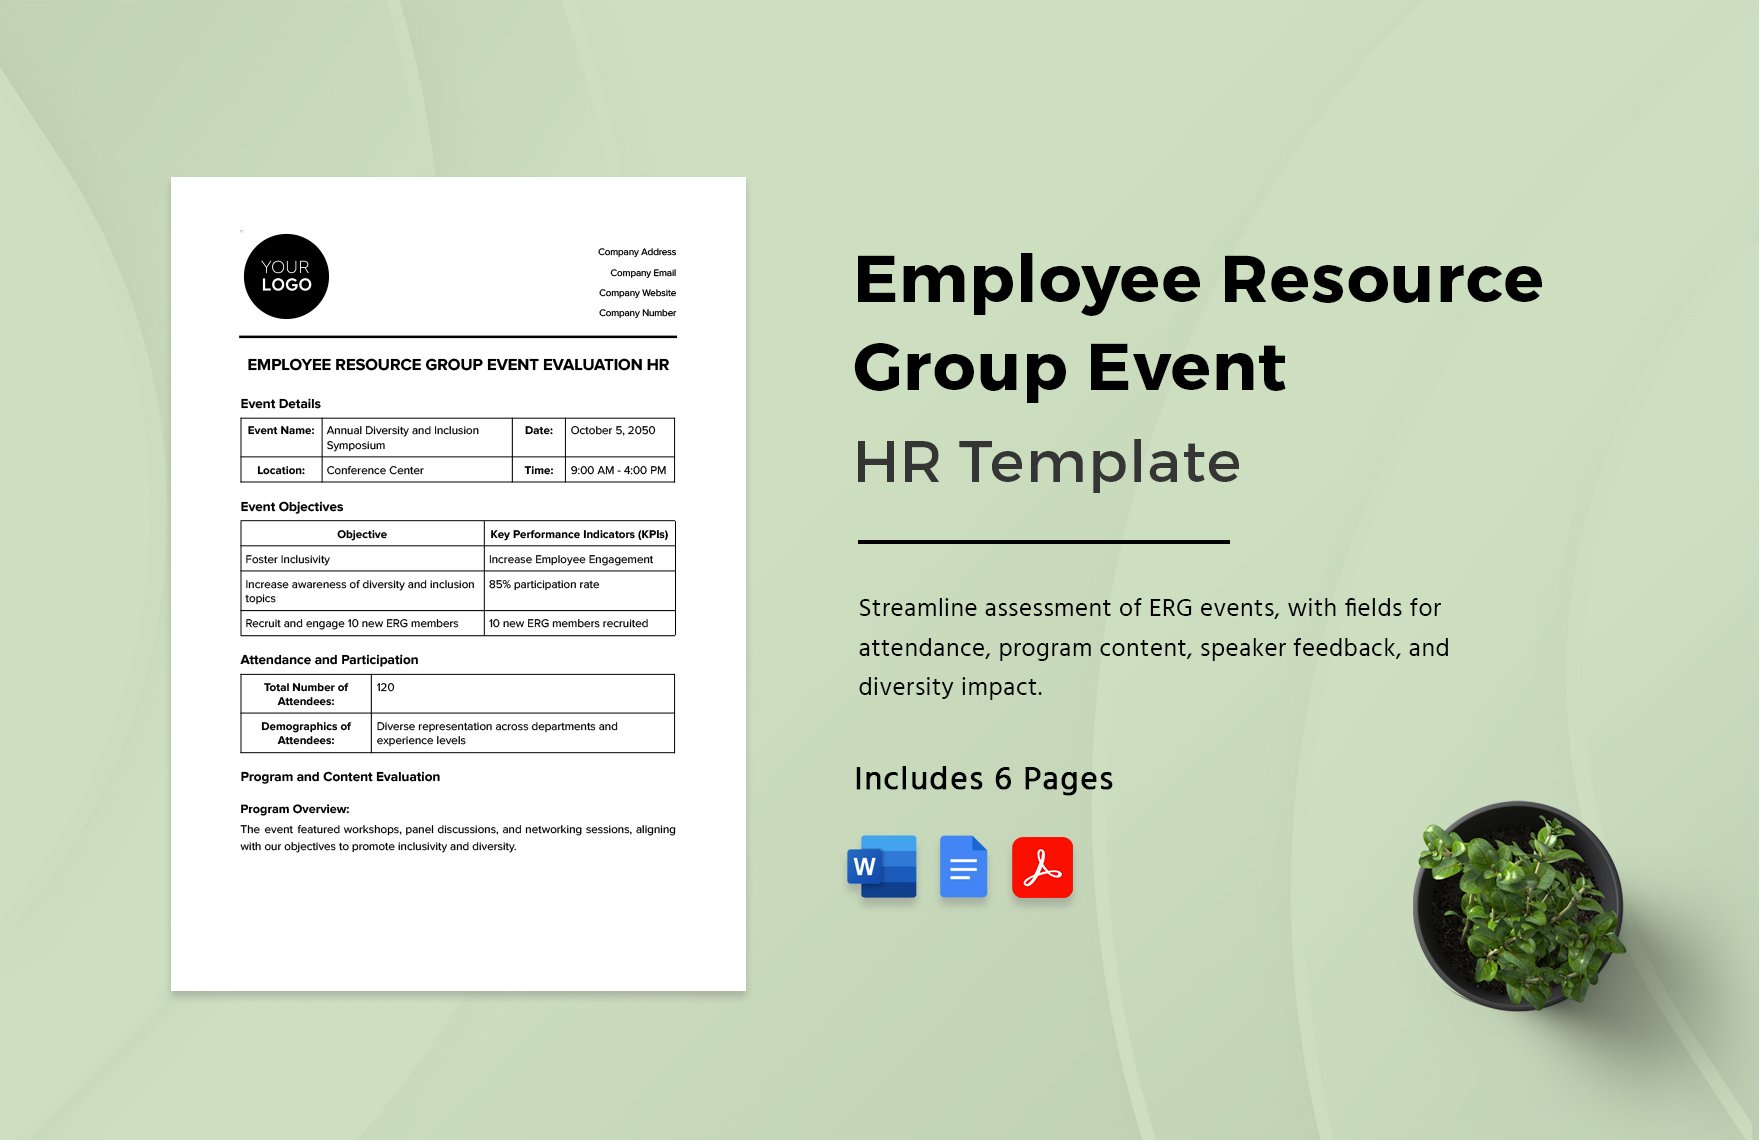 Employee Resource Group Event Evaluation HR Template in Word, Google Docs, PDF